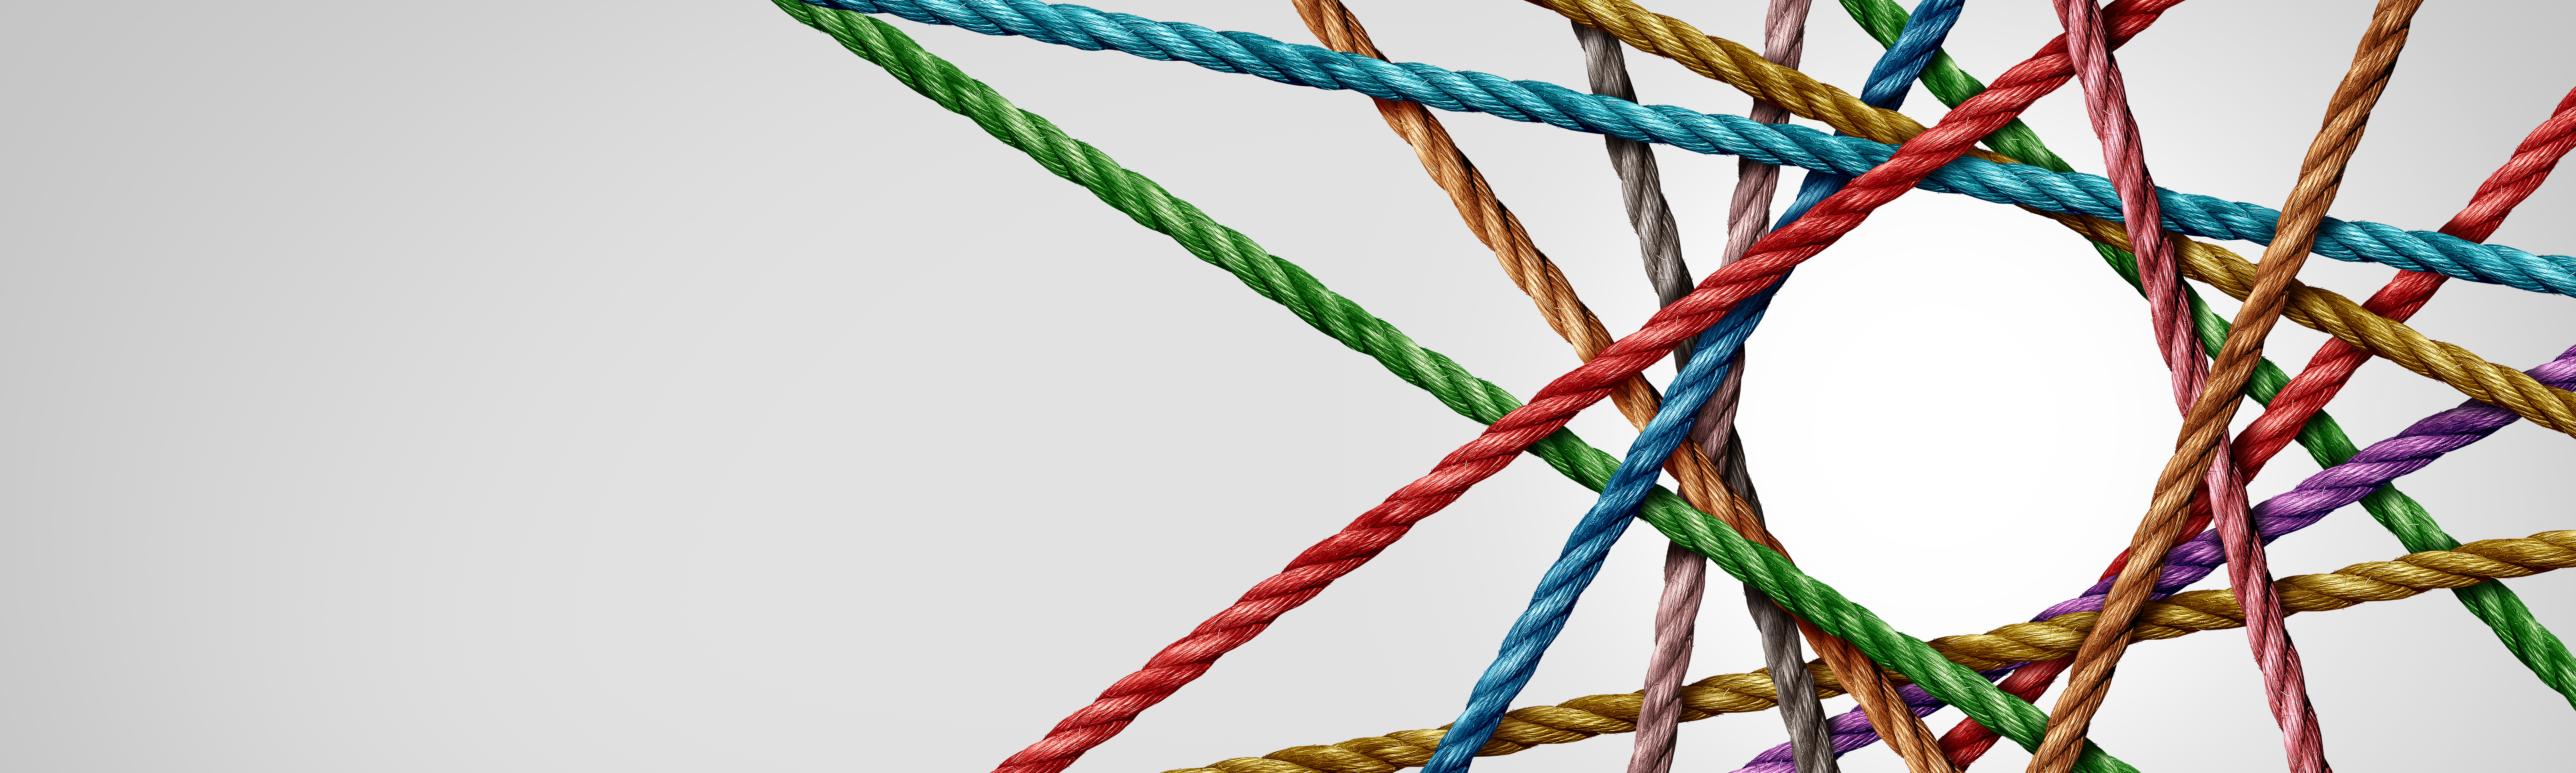 Diversity represented by different coloured ropes bound into a circle